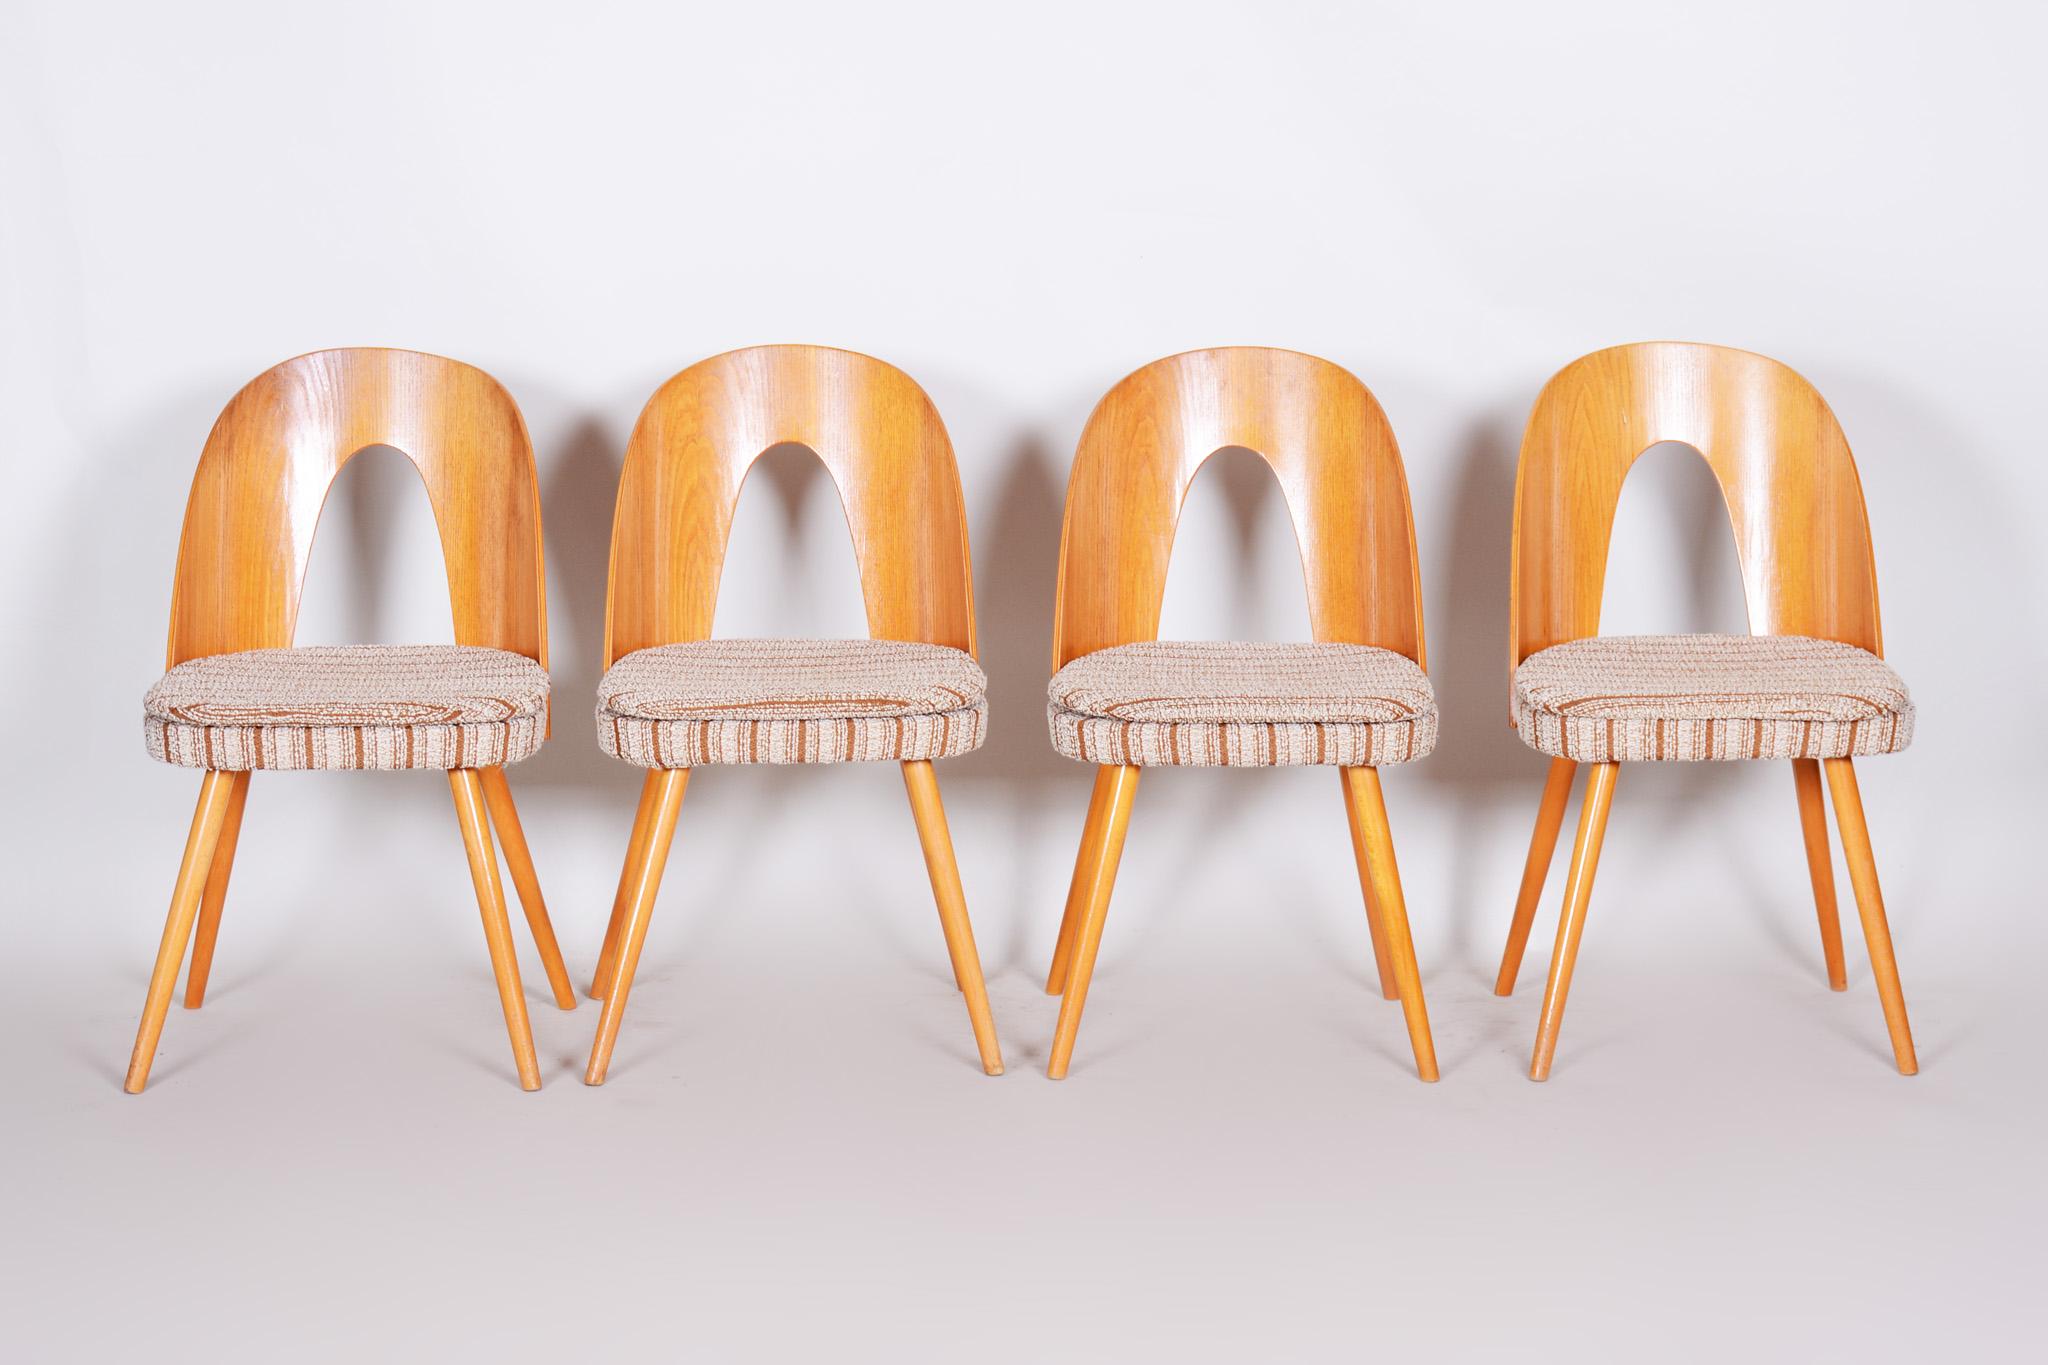 Czech midcentury chairs, 4 pieces.
Material: Ash
Period: 1950-1959
Original preserved condition
Made by architect Antonín Šuman.